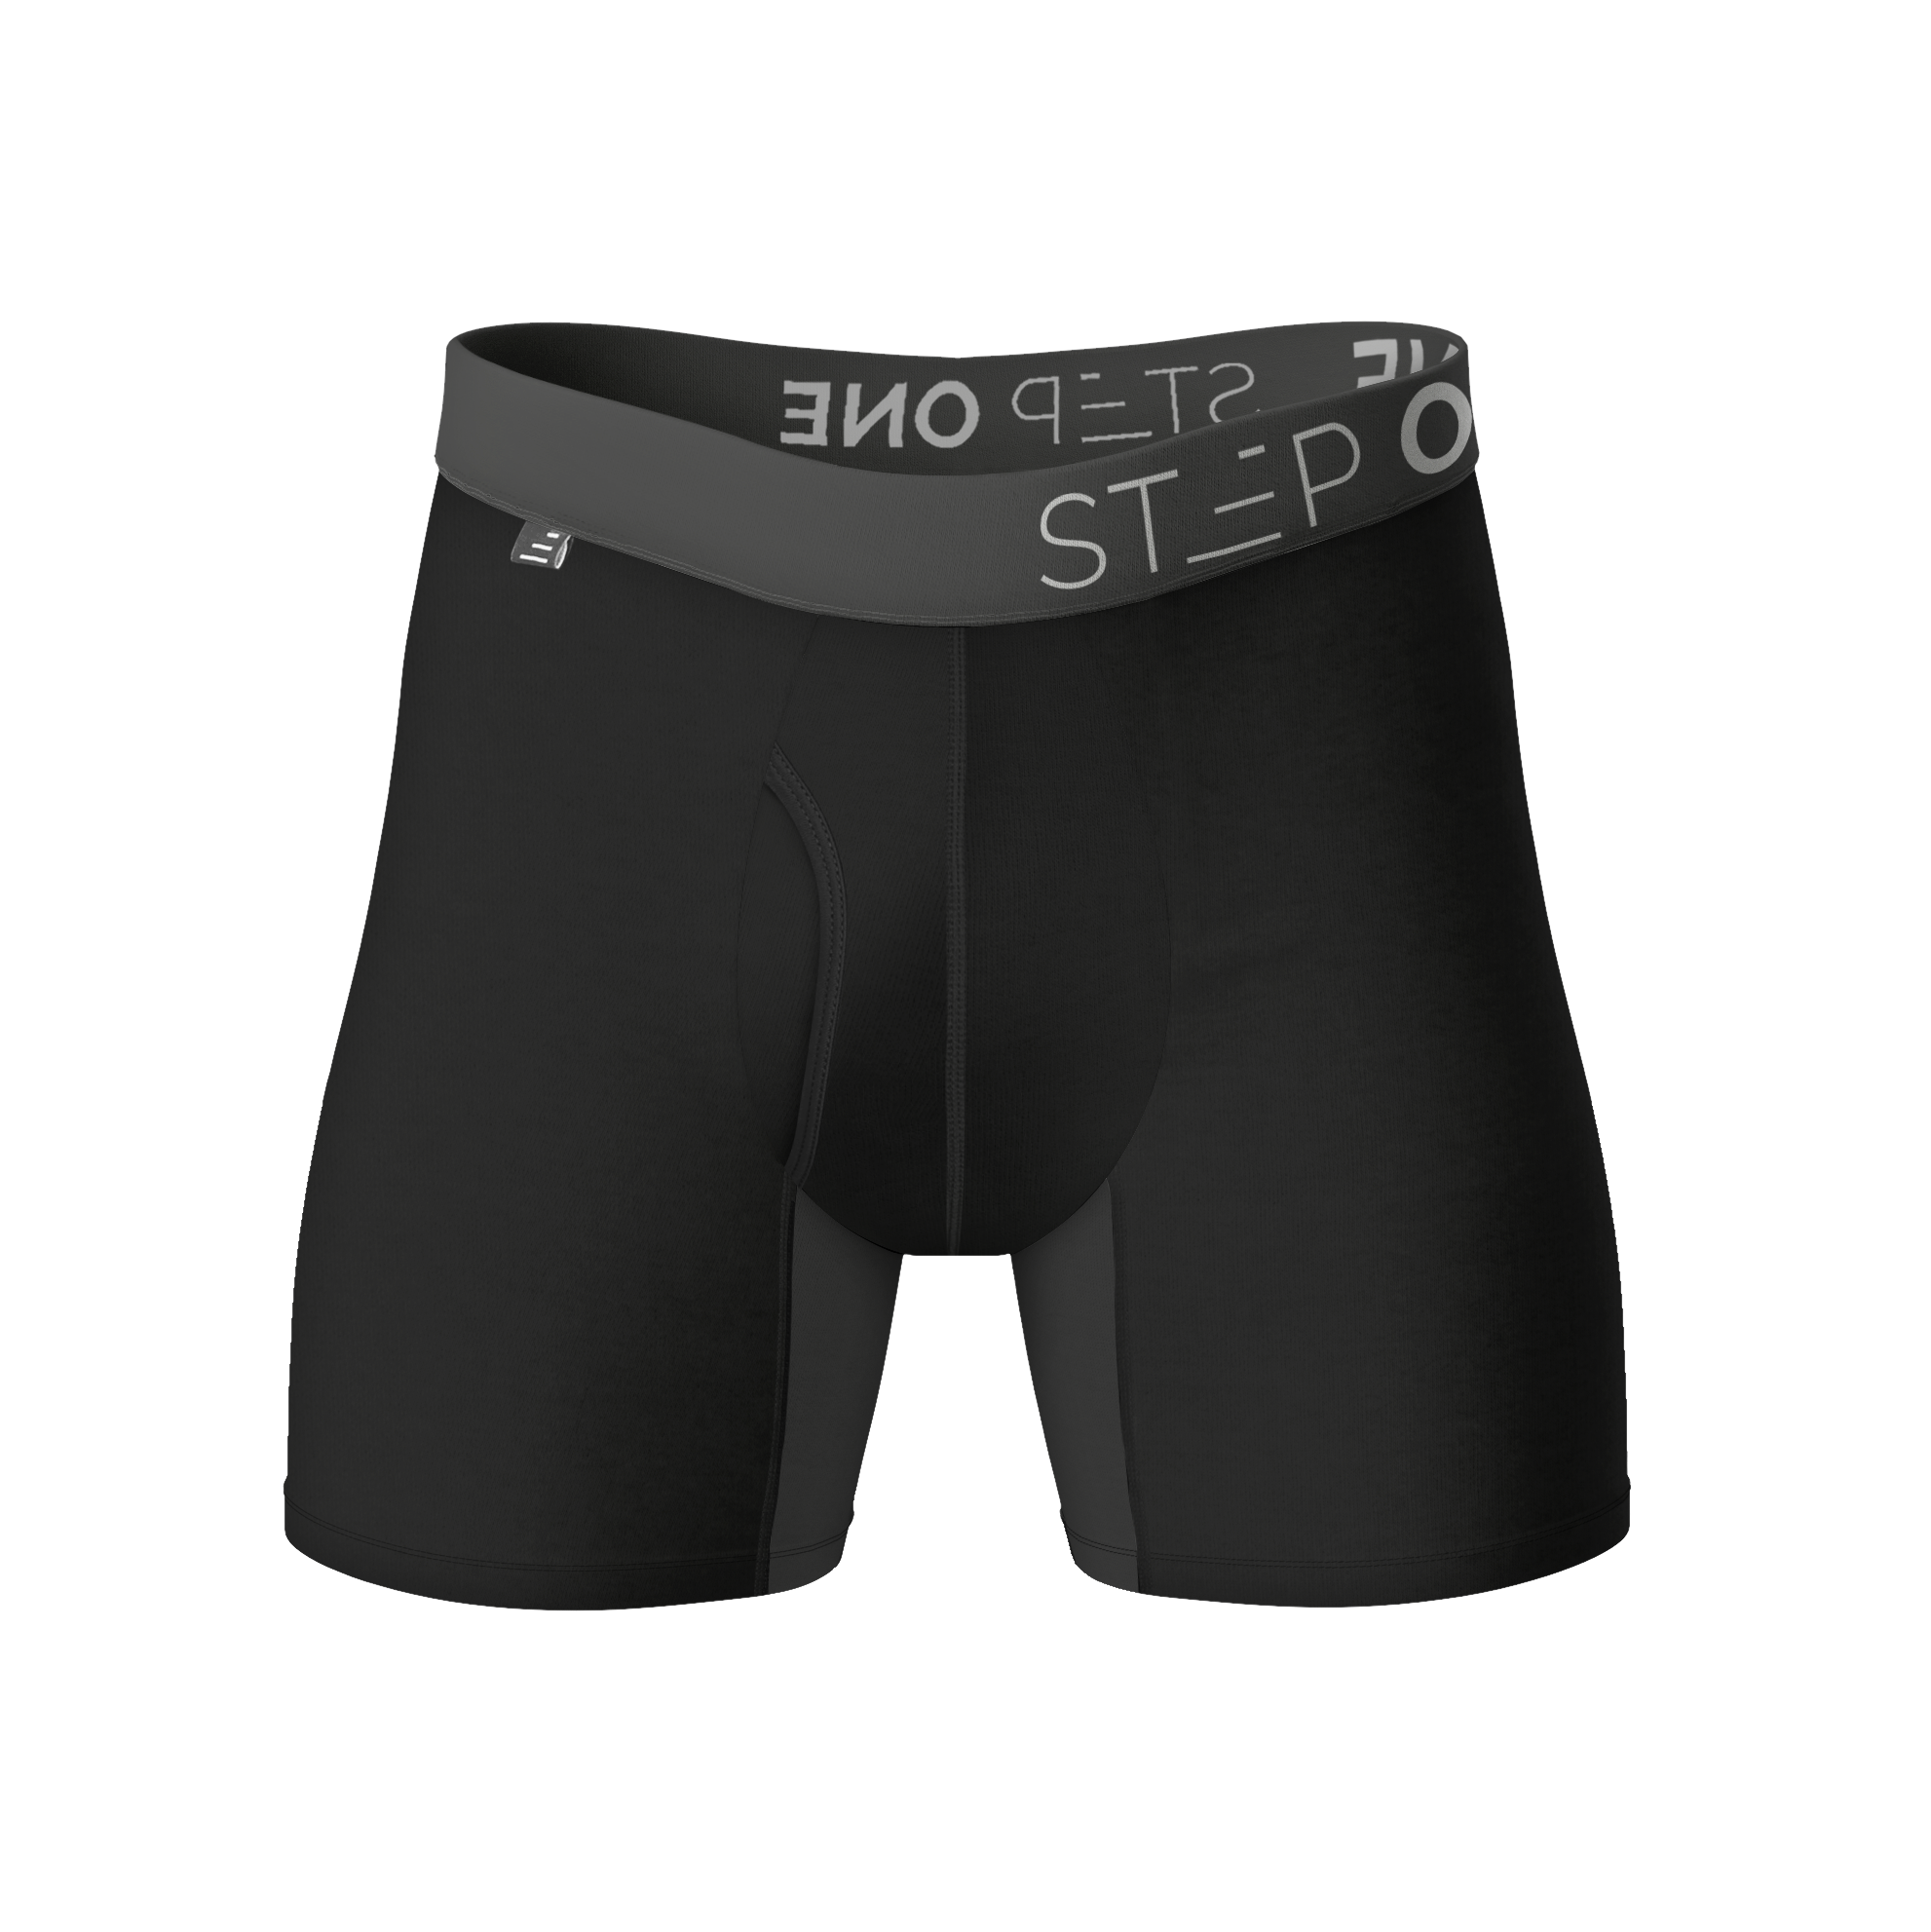 Boxer Brief Fly - Black Currants - View 1